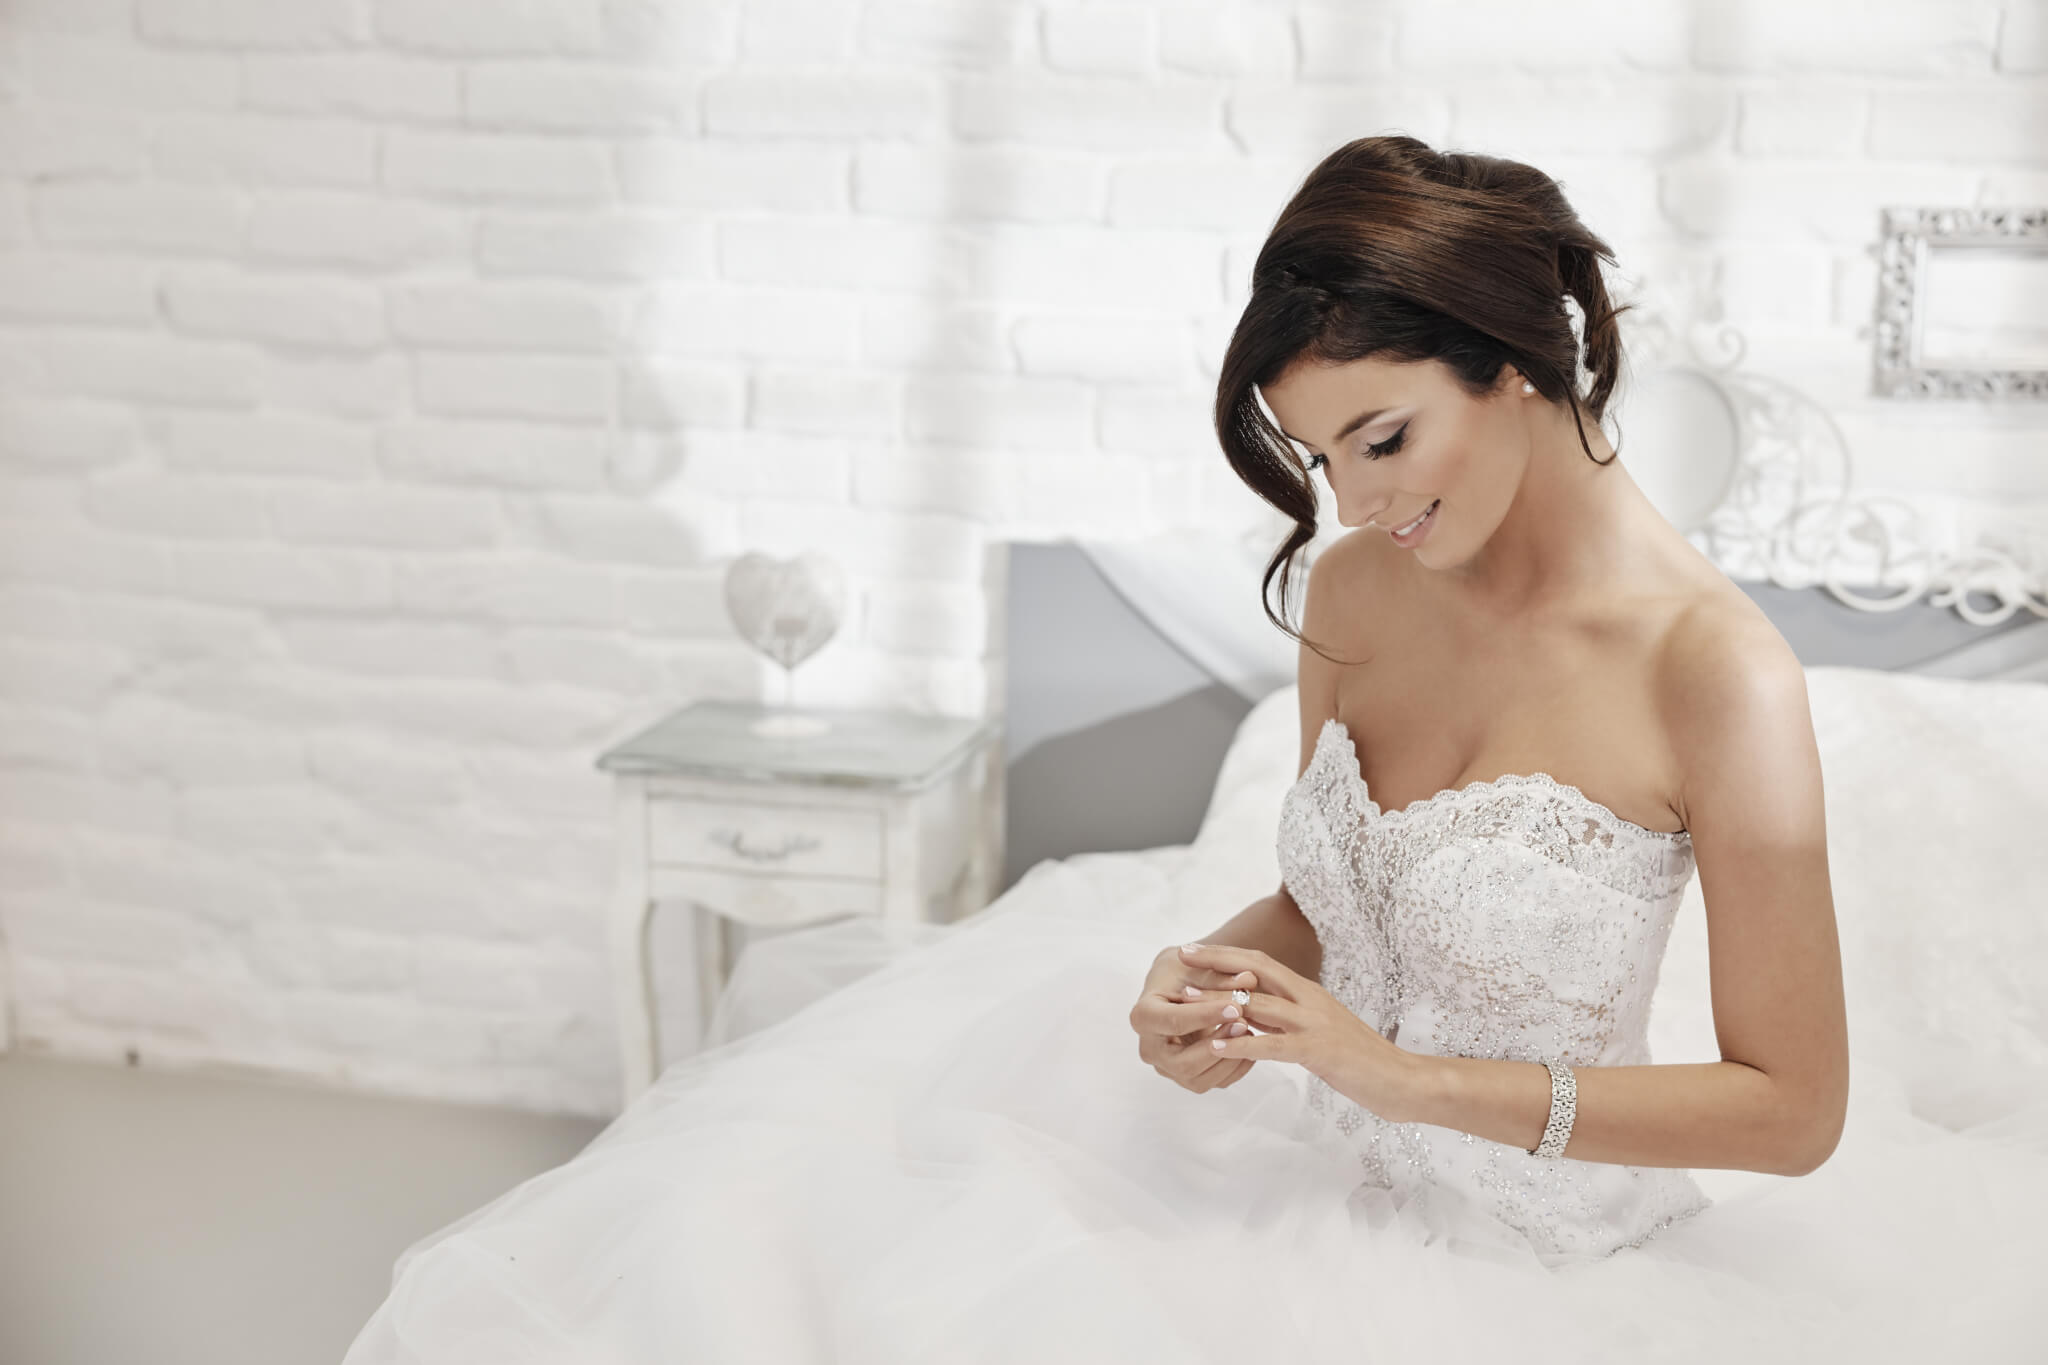 I’m a Shy Bride – How Do I Handle Being the Center of Attention?